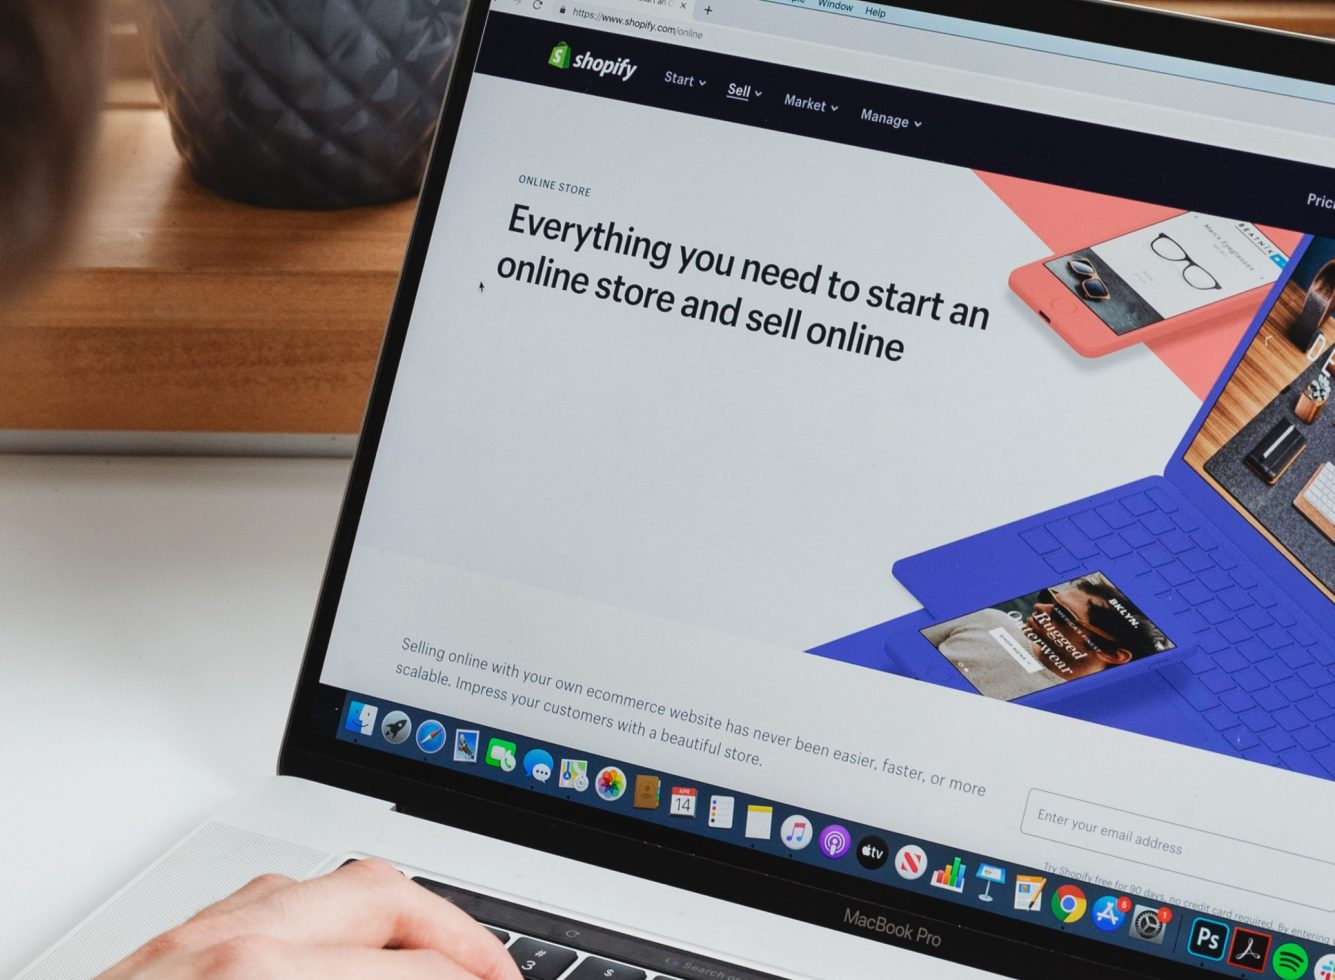 Why the Shopify Ecommerce Platform Should Be at the Top of Your List